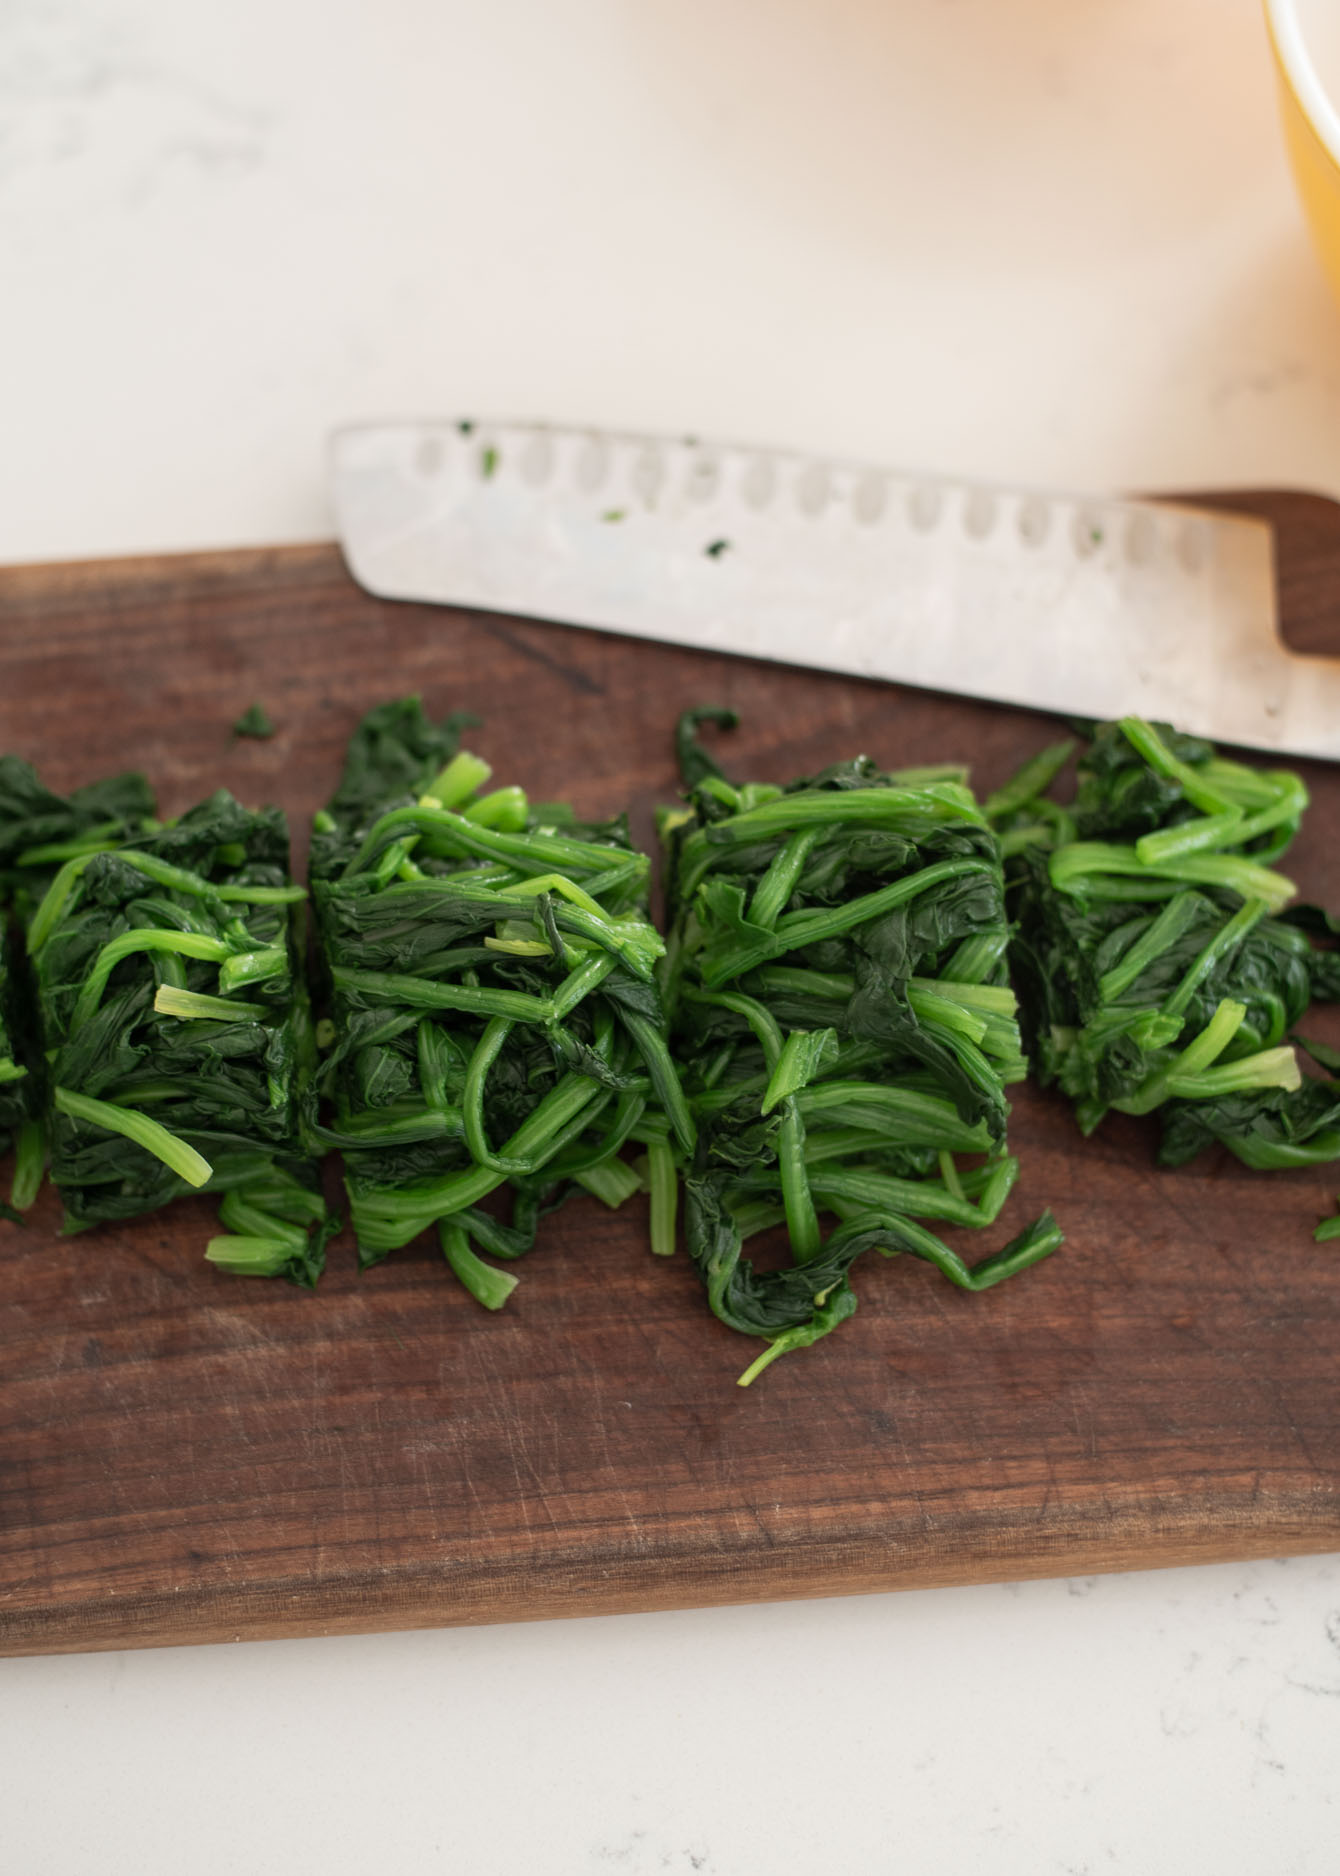 Long strands of blanched spinach cut into section.